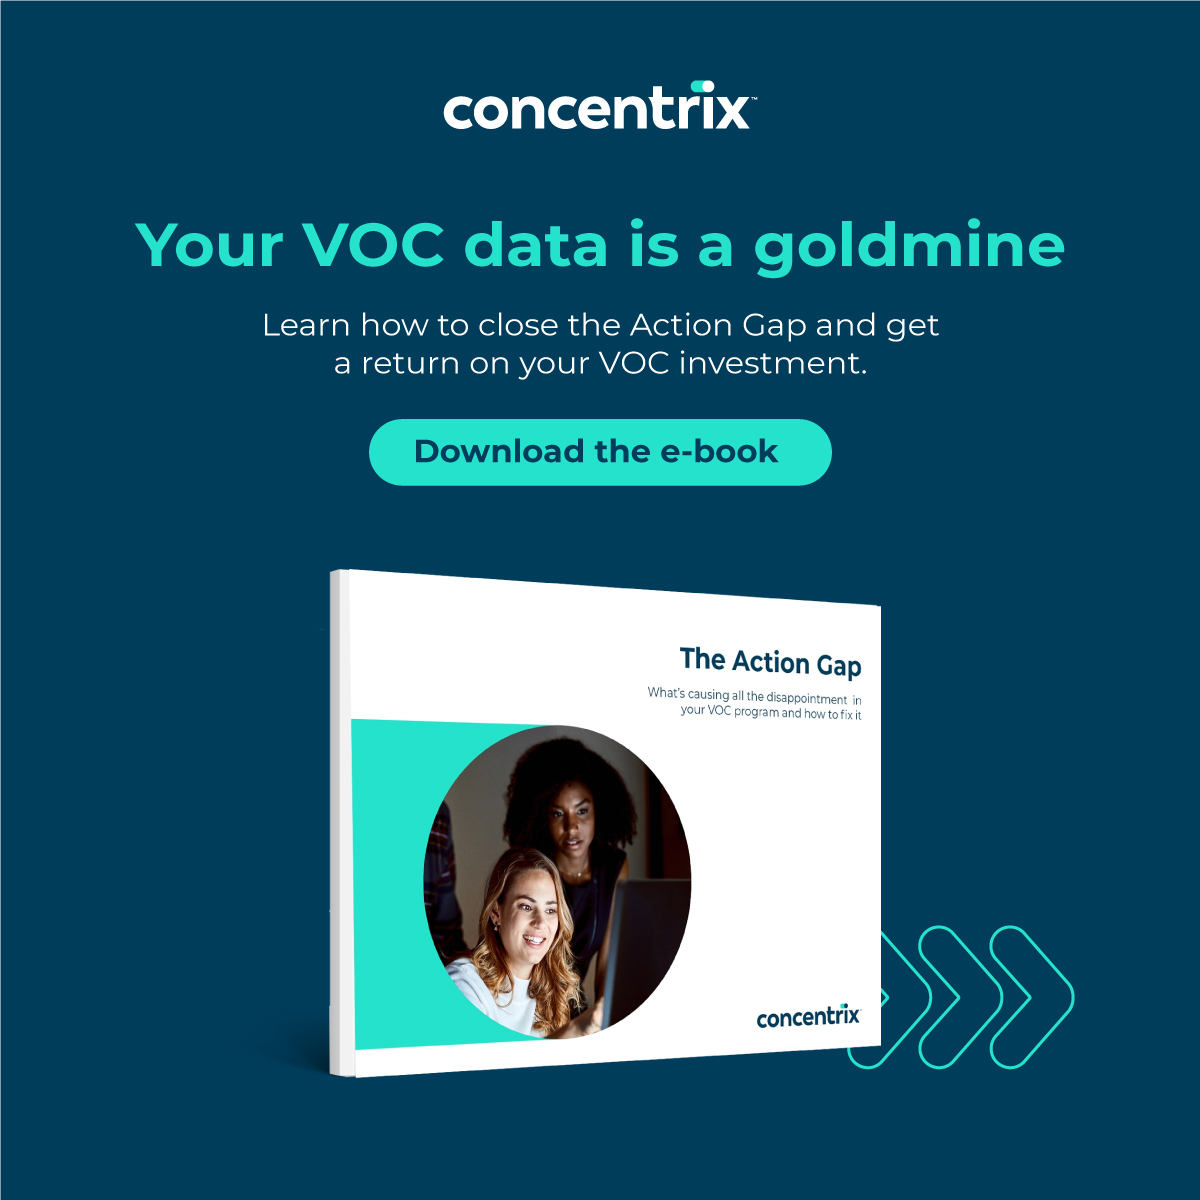 Struggling to keep customers raving about your brand? Discover how to turn VOC insights into a competitive advantage and learn proven strategies to design engaging surveys and empower your staff.  Download our ebook: ow.ly/V9Ys50RASkK #PowerOfConcentrix